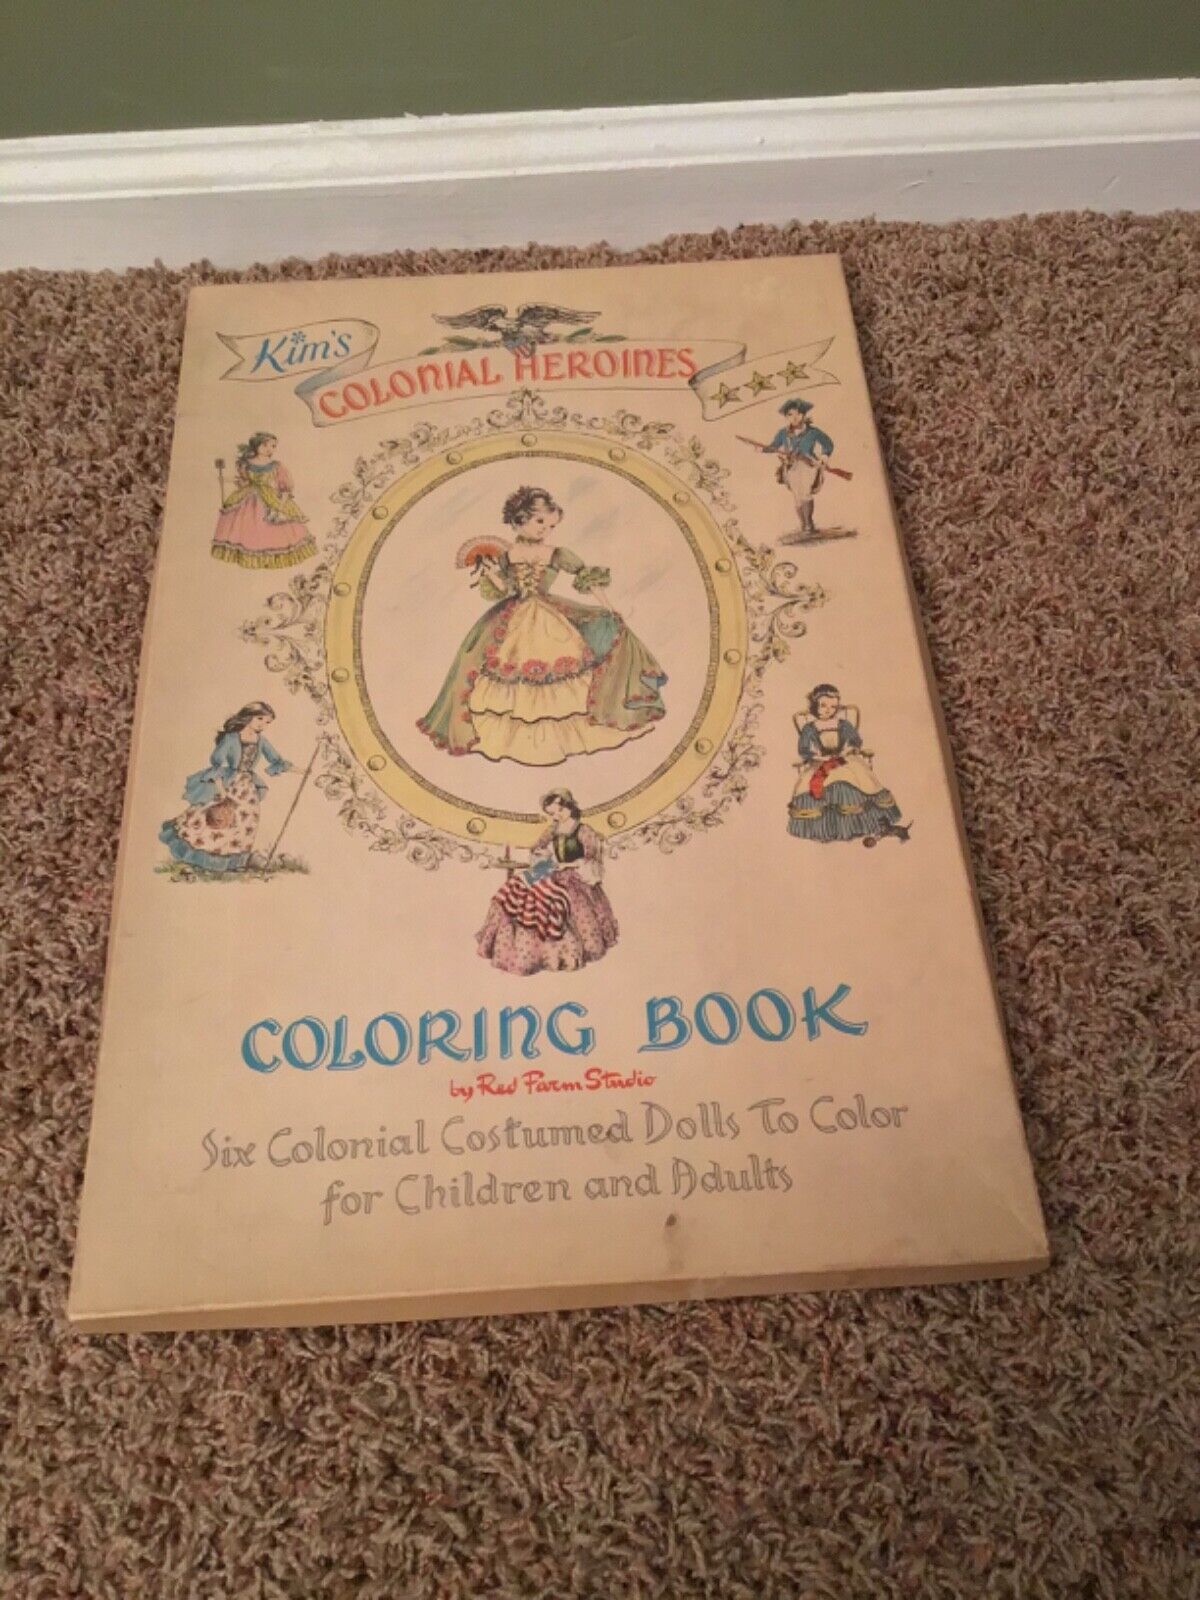 Vintage Kim’s Colonial Heroines Coloring Book by Red Farm Studio